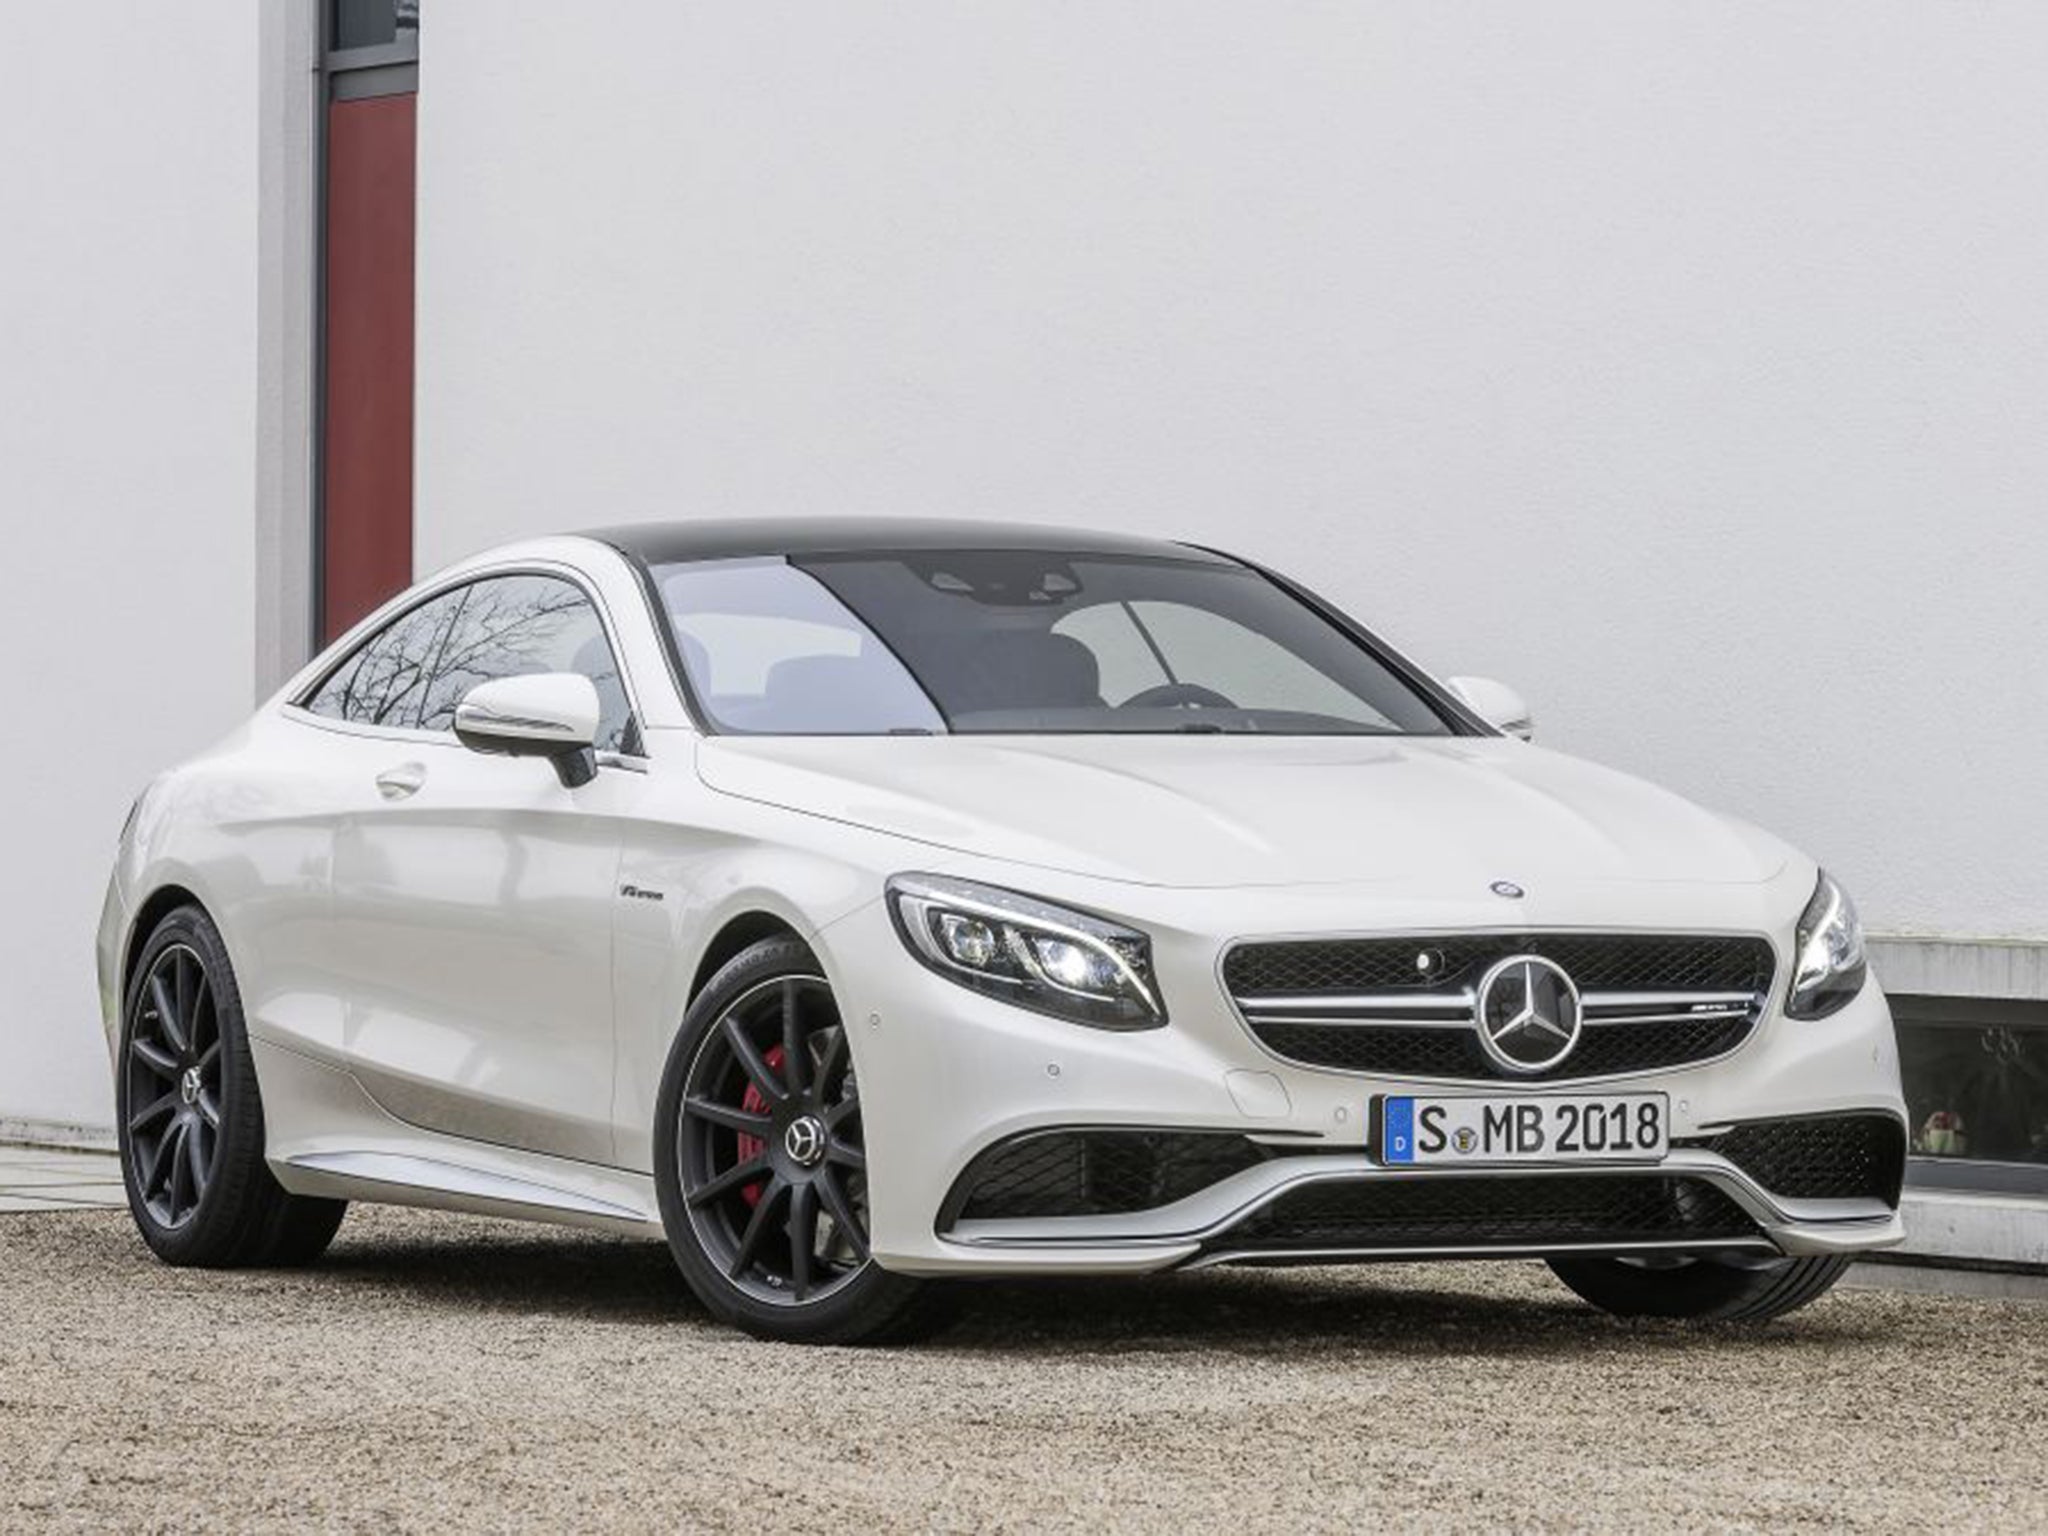 The S-Class Coupé has to compete with the cachet of the Bentley Continental GT and Aston Martin Vantage